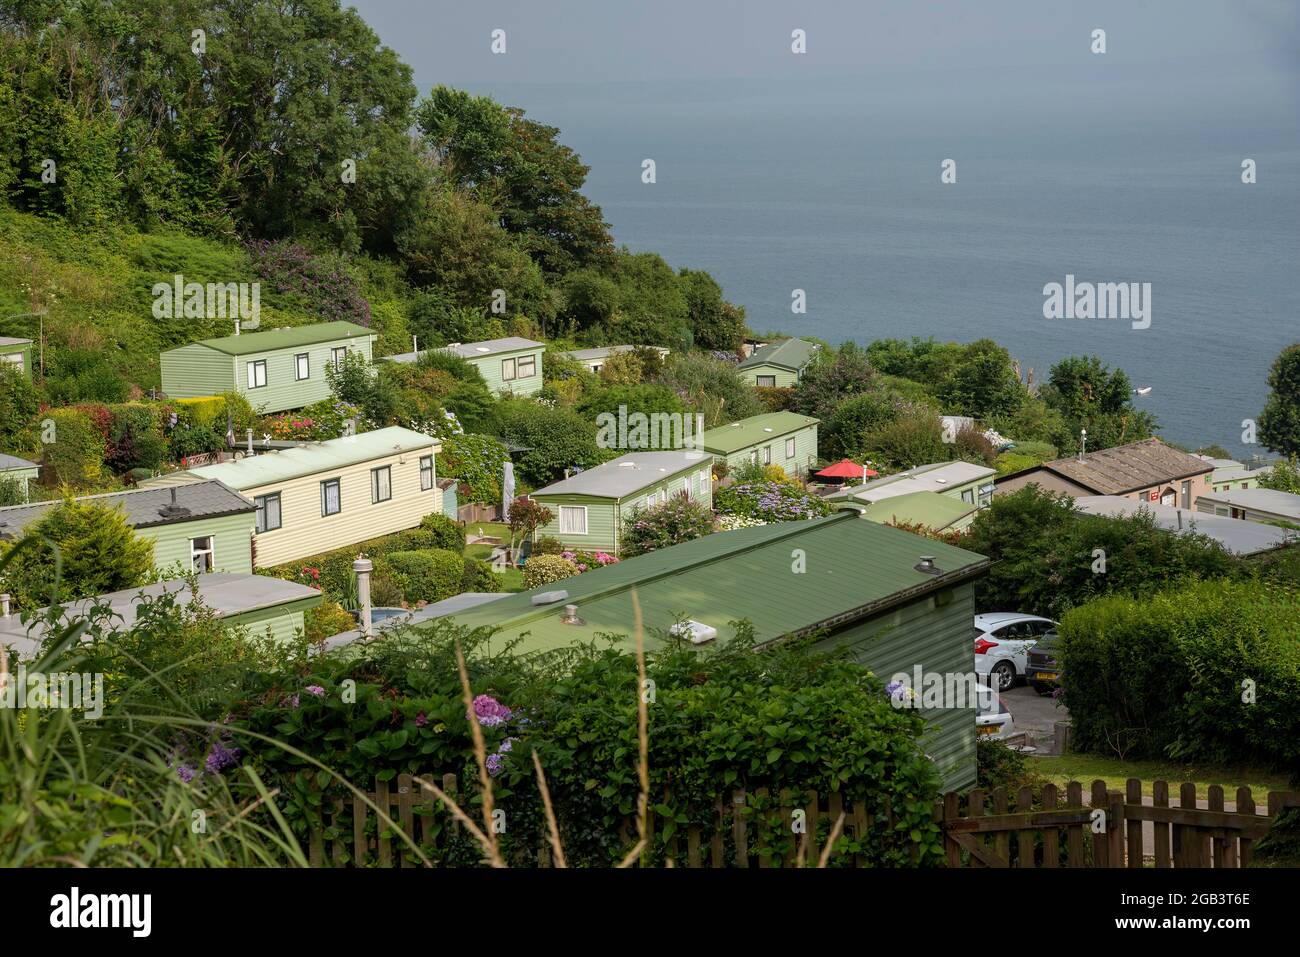 Devon, England, UK. 2021. A group of mobile homes and caravans overlook the sea in South Devon. Stock Photo